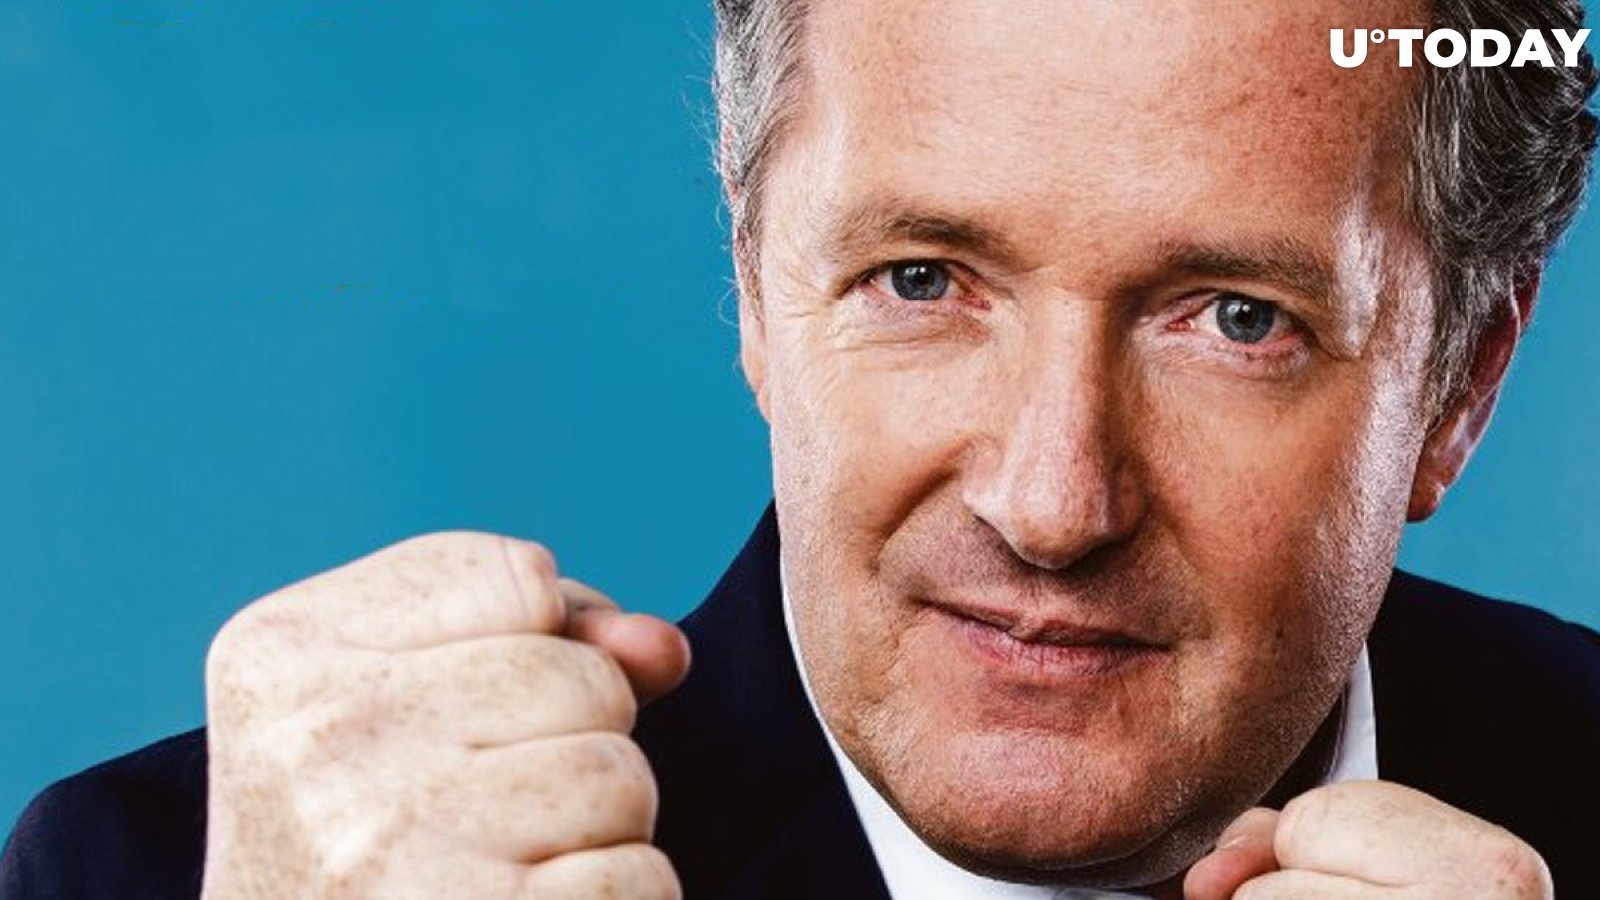 Piers Morgan Says He’s Not Getting into Bitcoin. Here’s What His “Big Announcement” Was All About